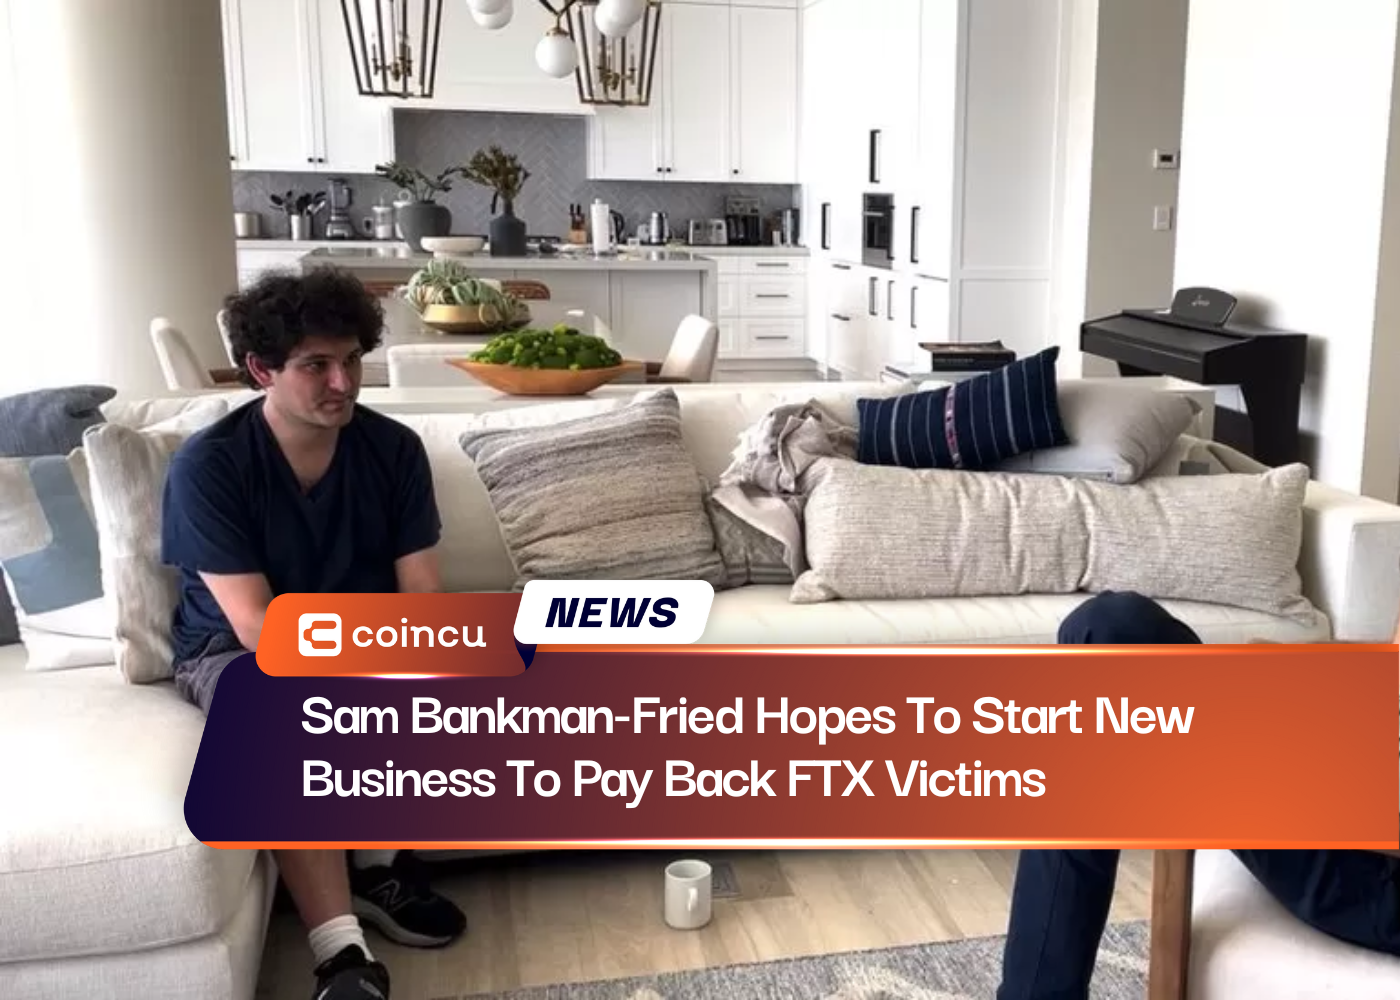 Sam Bankman-Fried Hopes To Start New Business To Pay Back FTX Victims